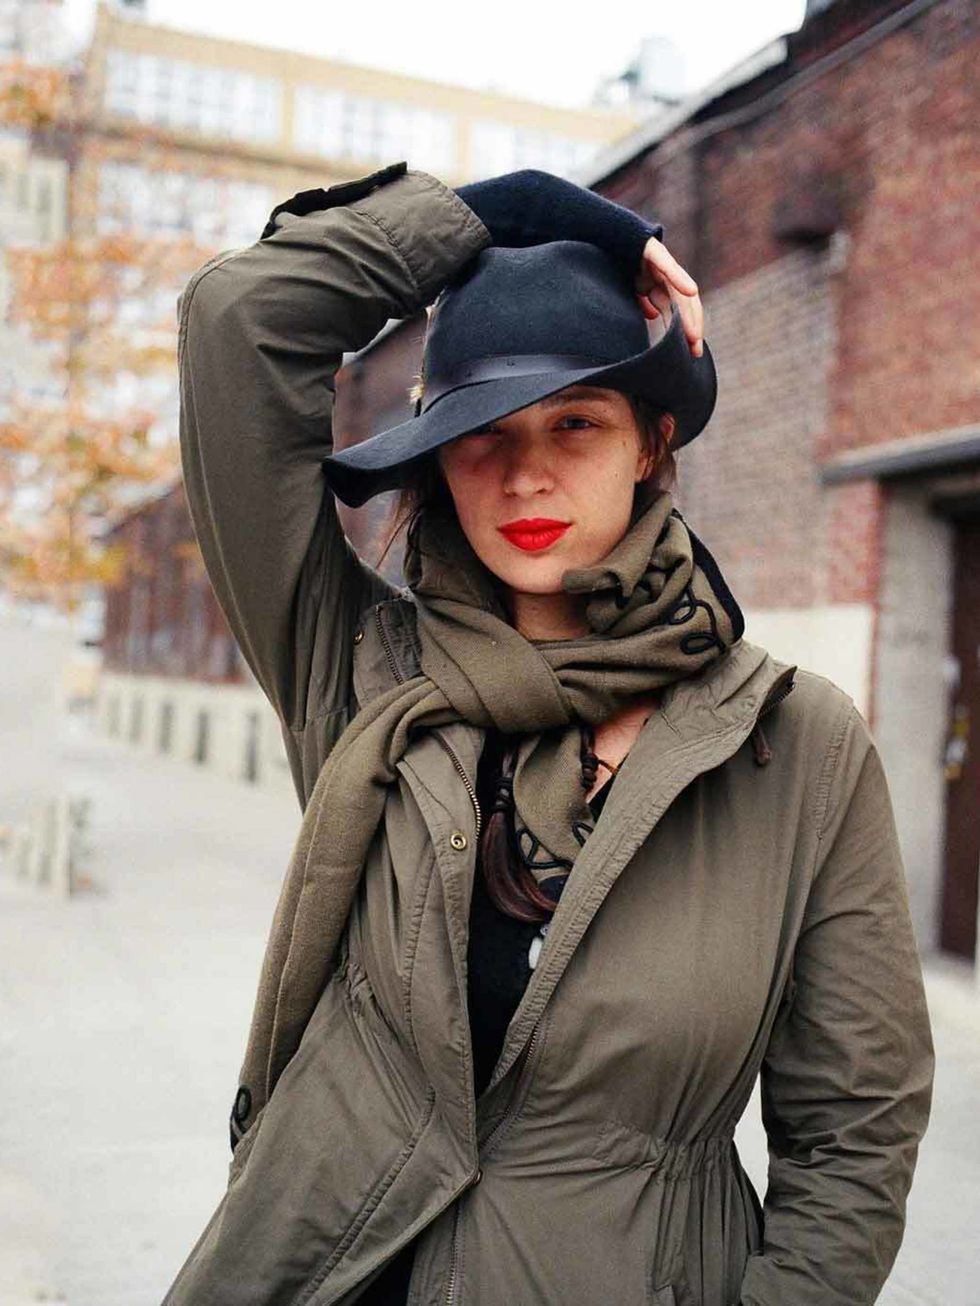 <p>Rebecca, Brooklyn 2012</p><p>Wearing: Barbour Hat, Uniqlo Jacket, Vintage Jumper and Scarf</p>